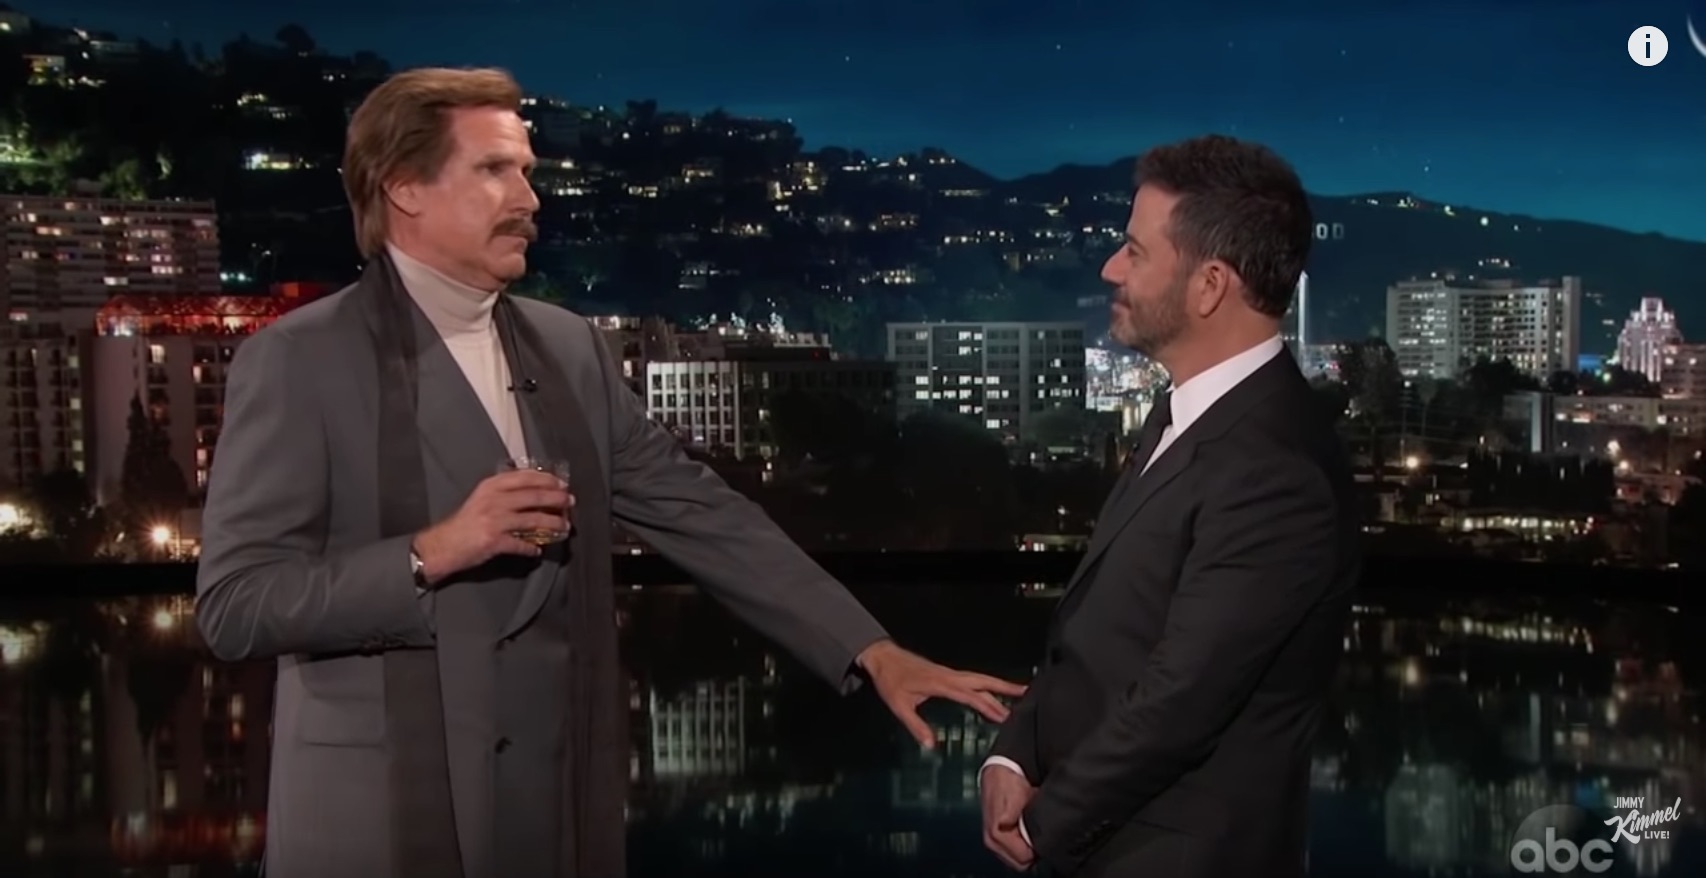 Ron Burgundy late night best moments for Will Ferrell